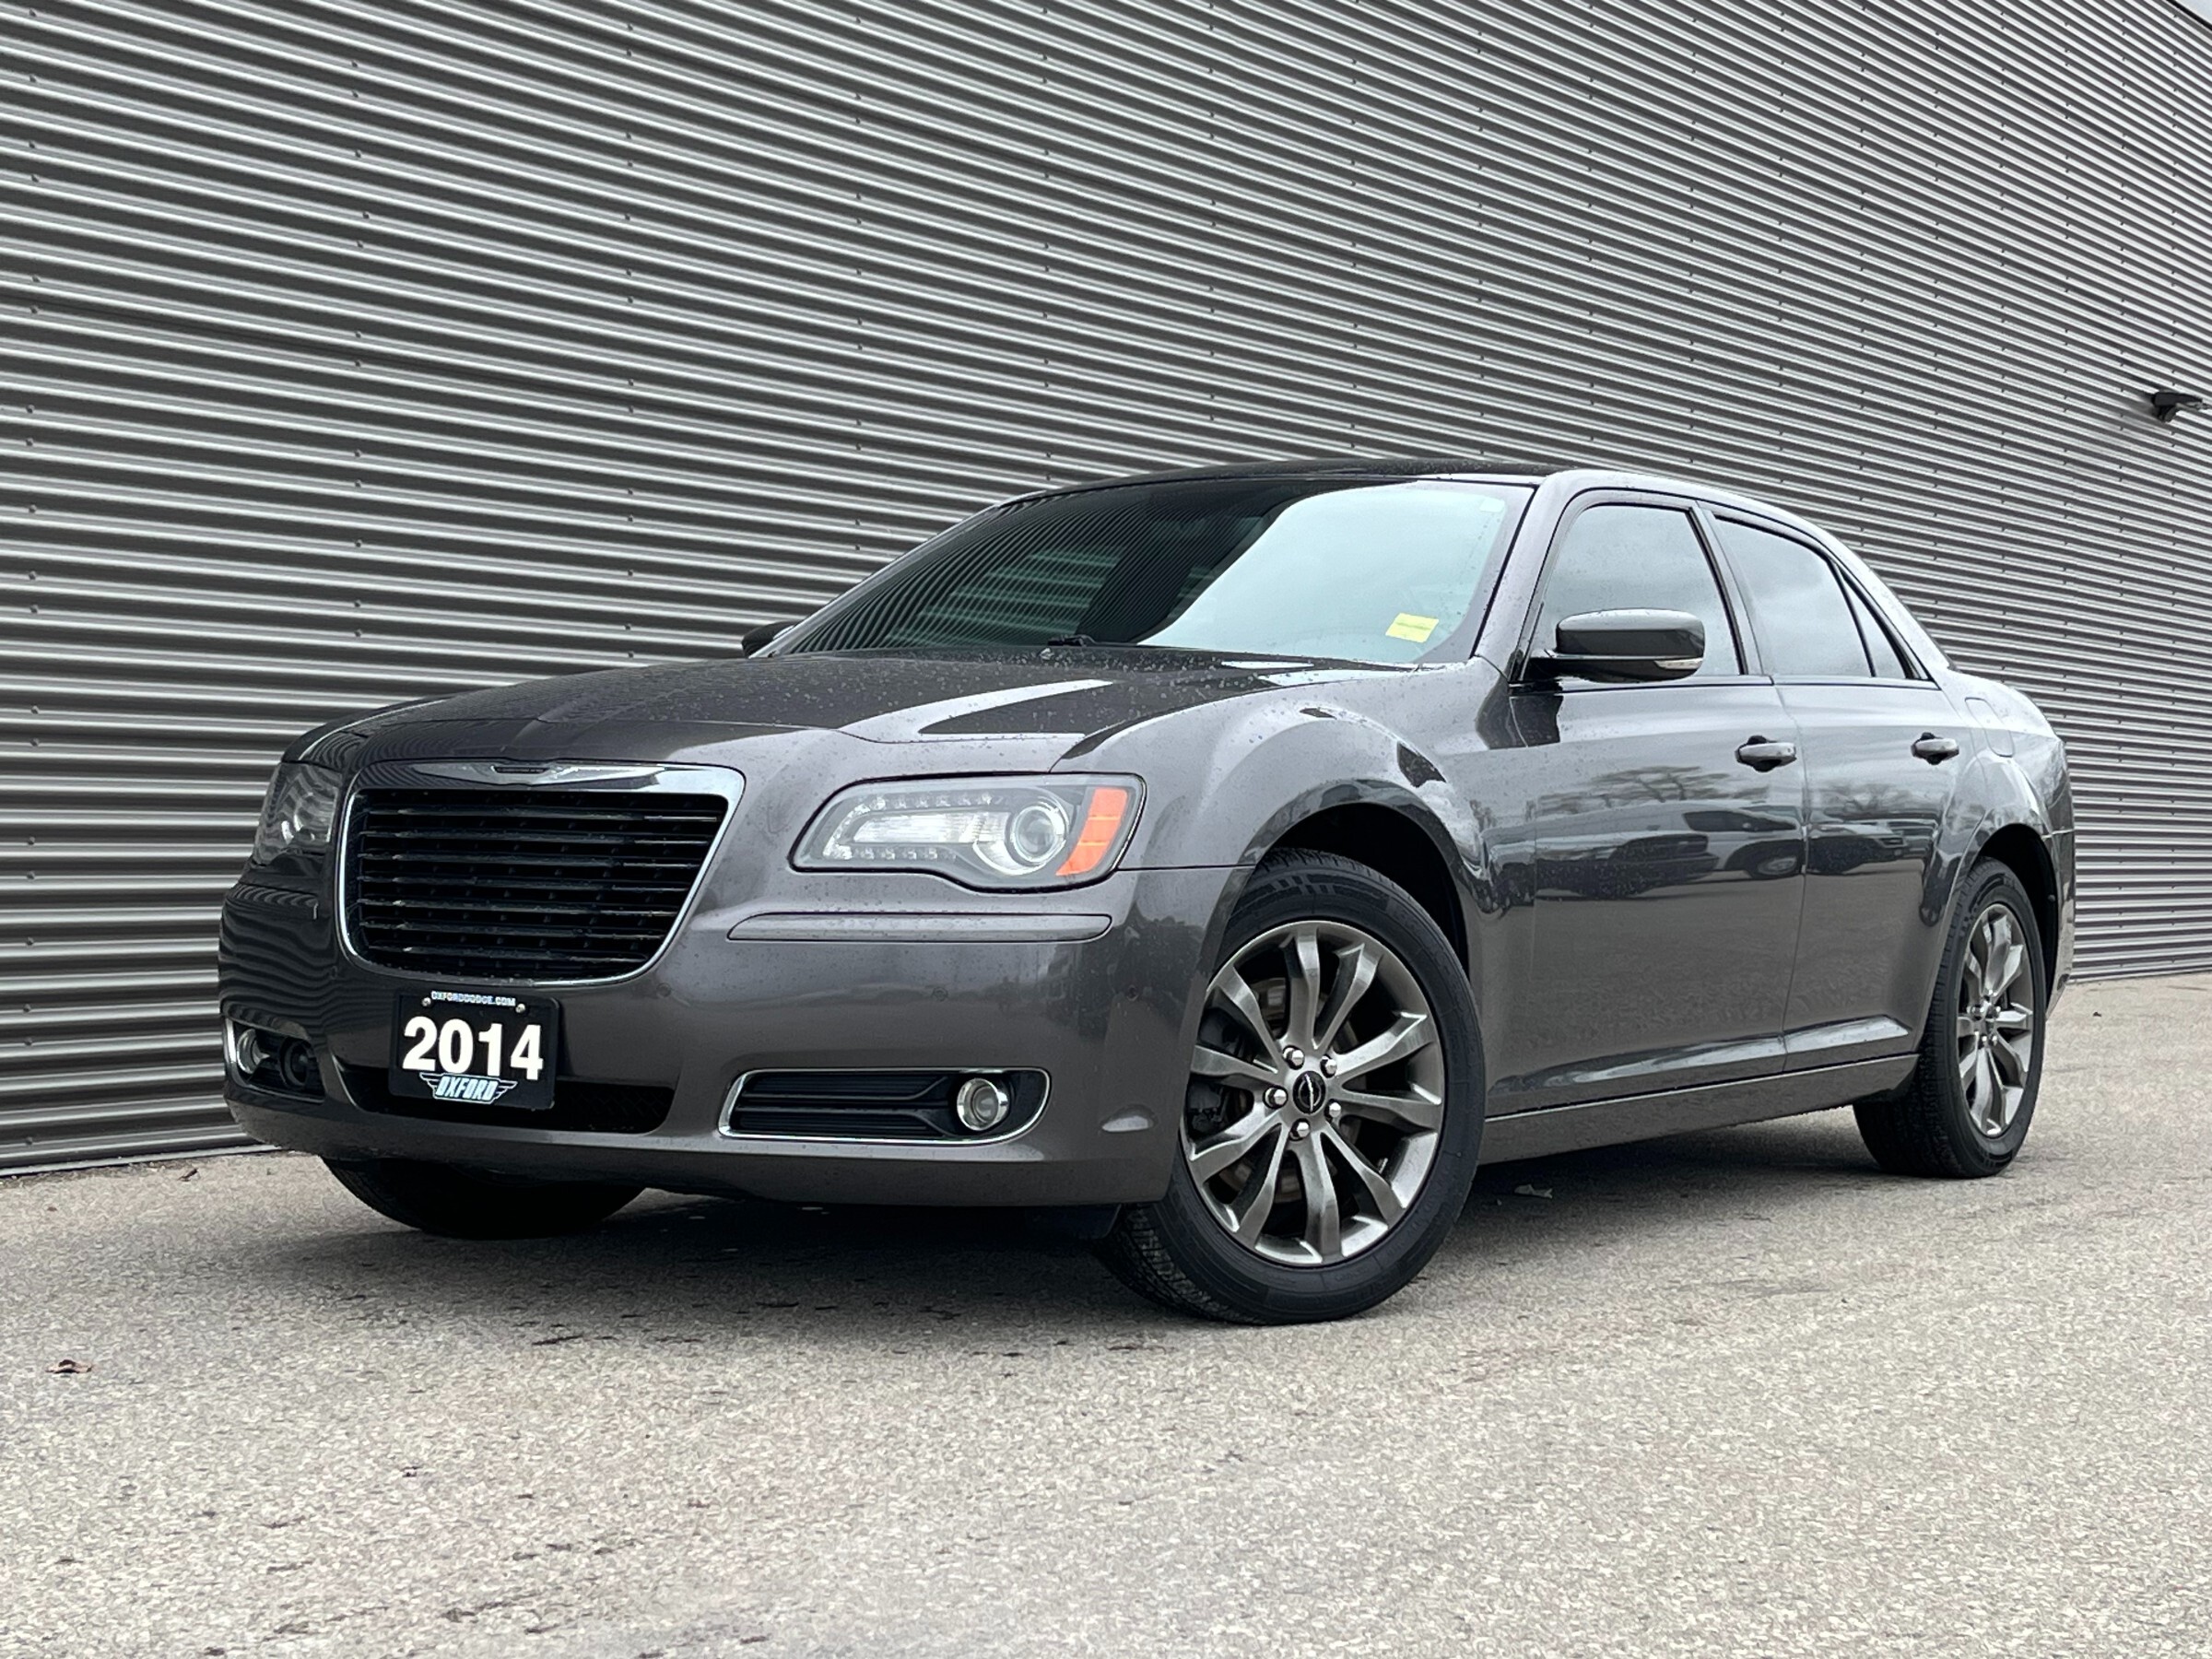 2014 Chrysler 300 S Panoramic Sunroof, Fully Loaded, Winter Tires, L